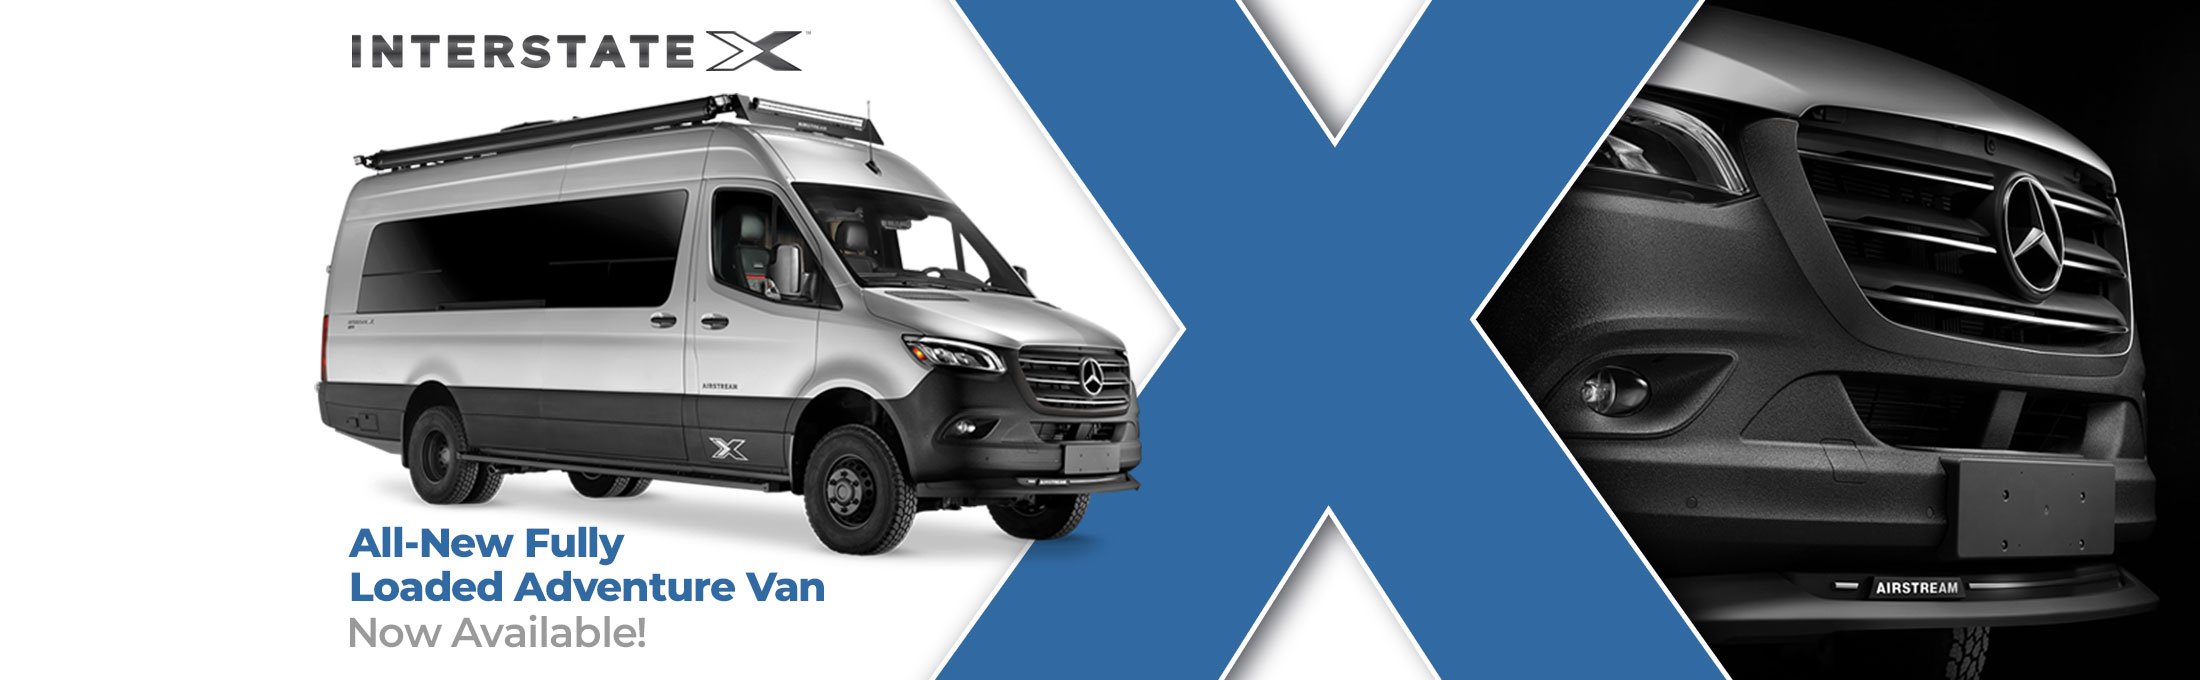 Airstream Interstate X: All-New Fully Loaded Adventure Van. Now Available!